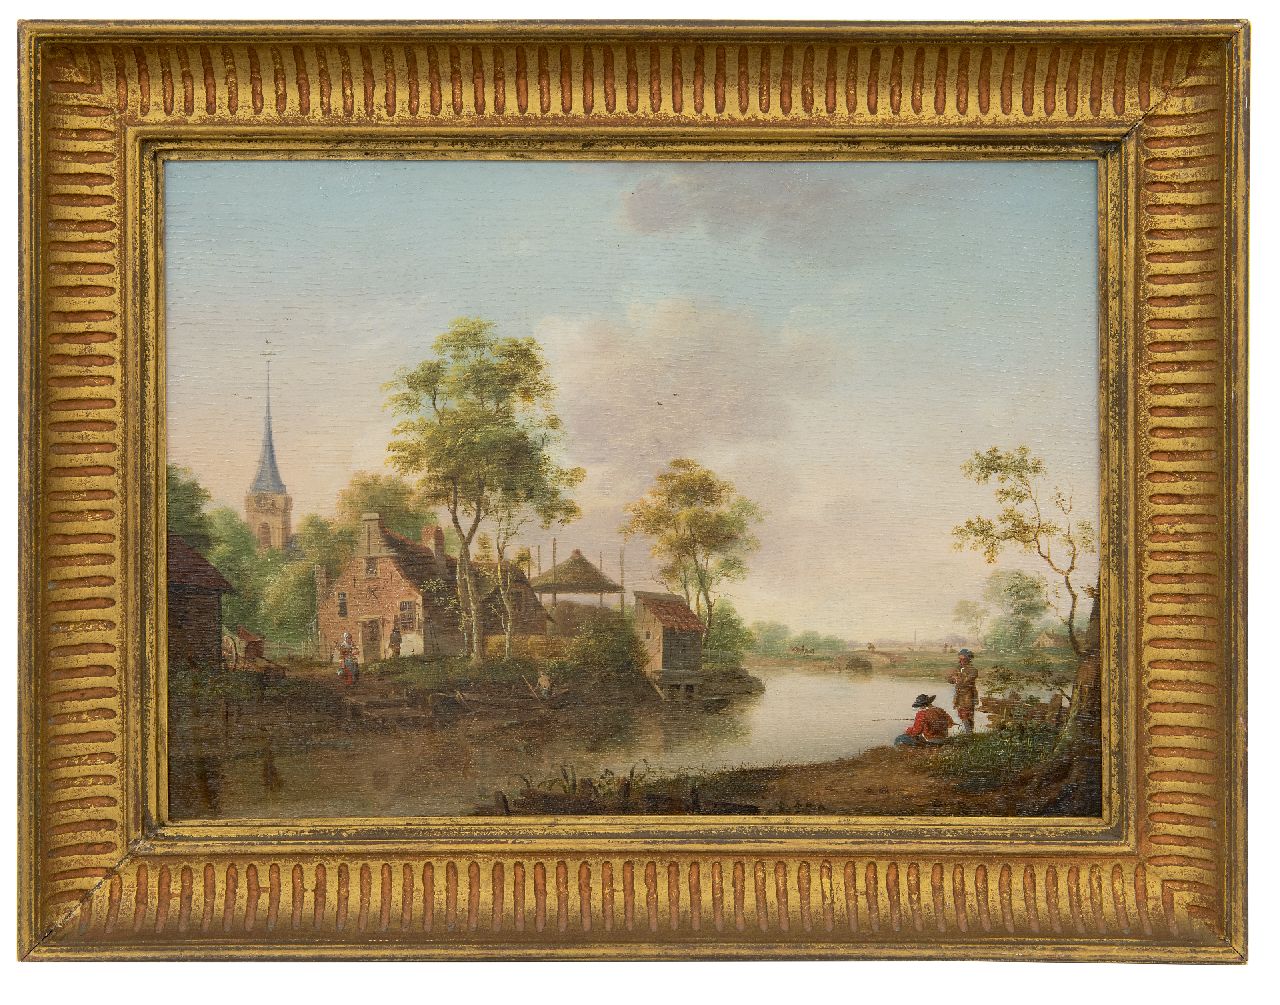 Hollandse School, 18e eeuw   | Hollandse School, 18e eeuw | Paintings offered for sale | Dutch landscape, oil on panel 32.3 x 45.8 cm